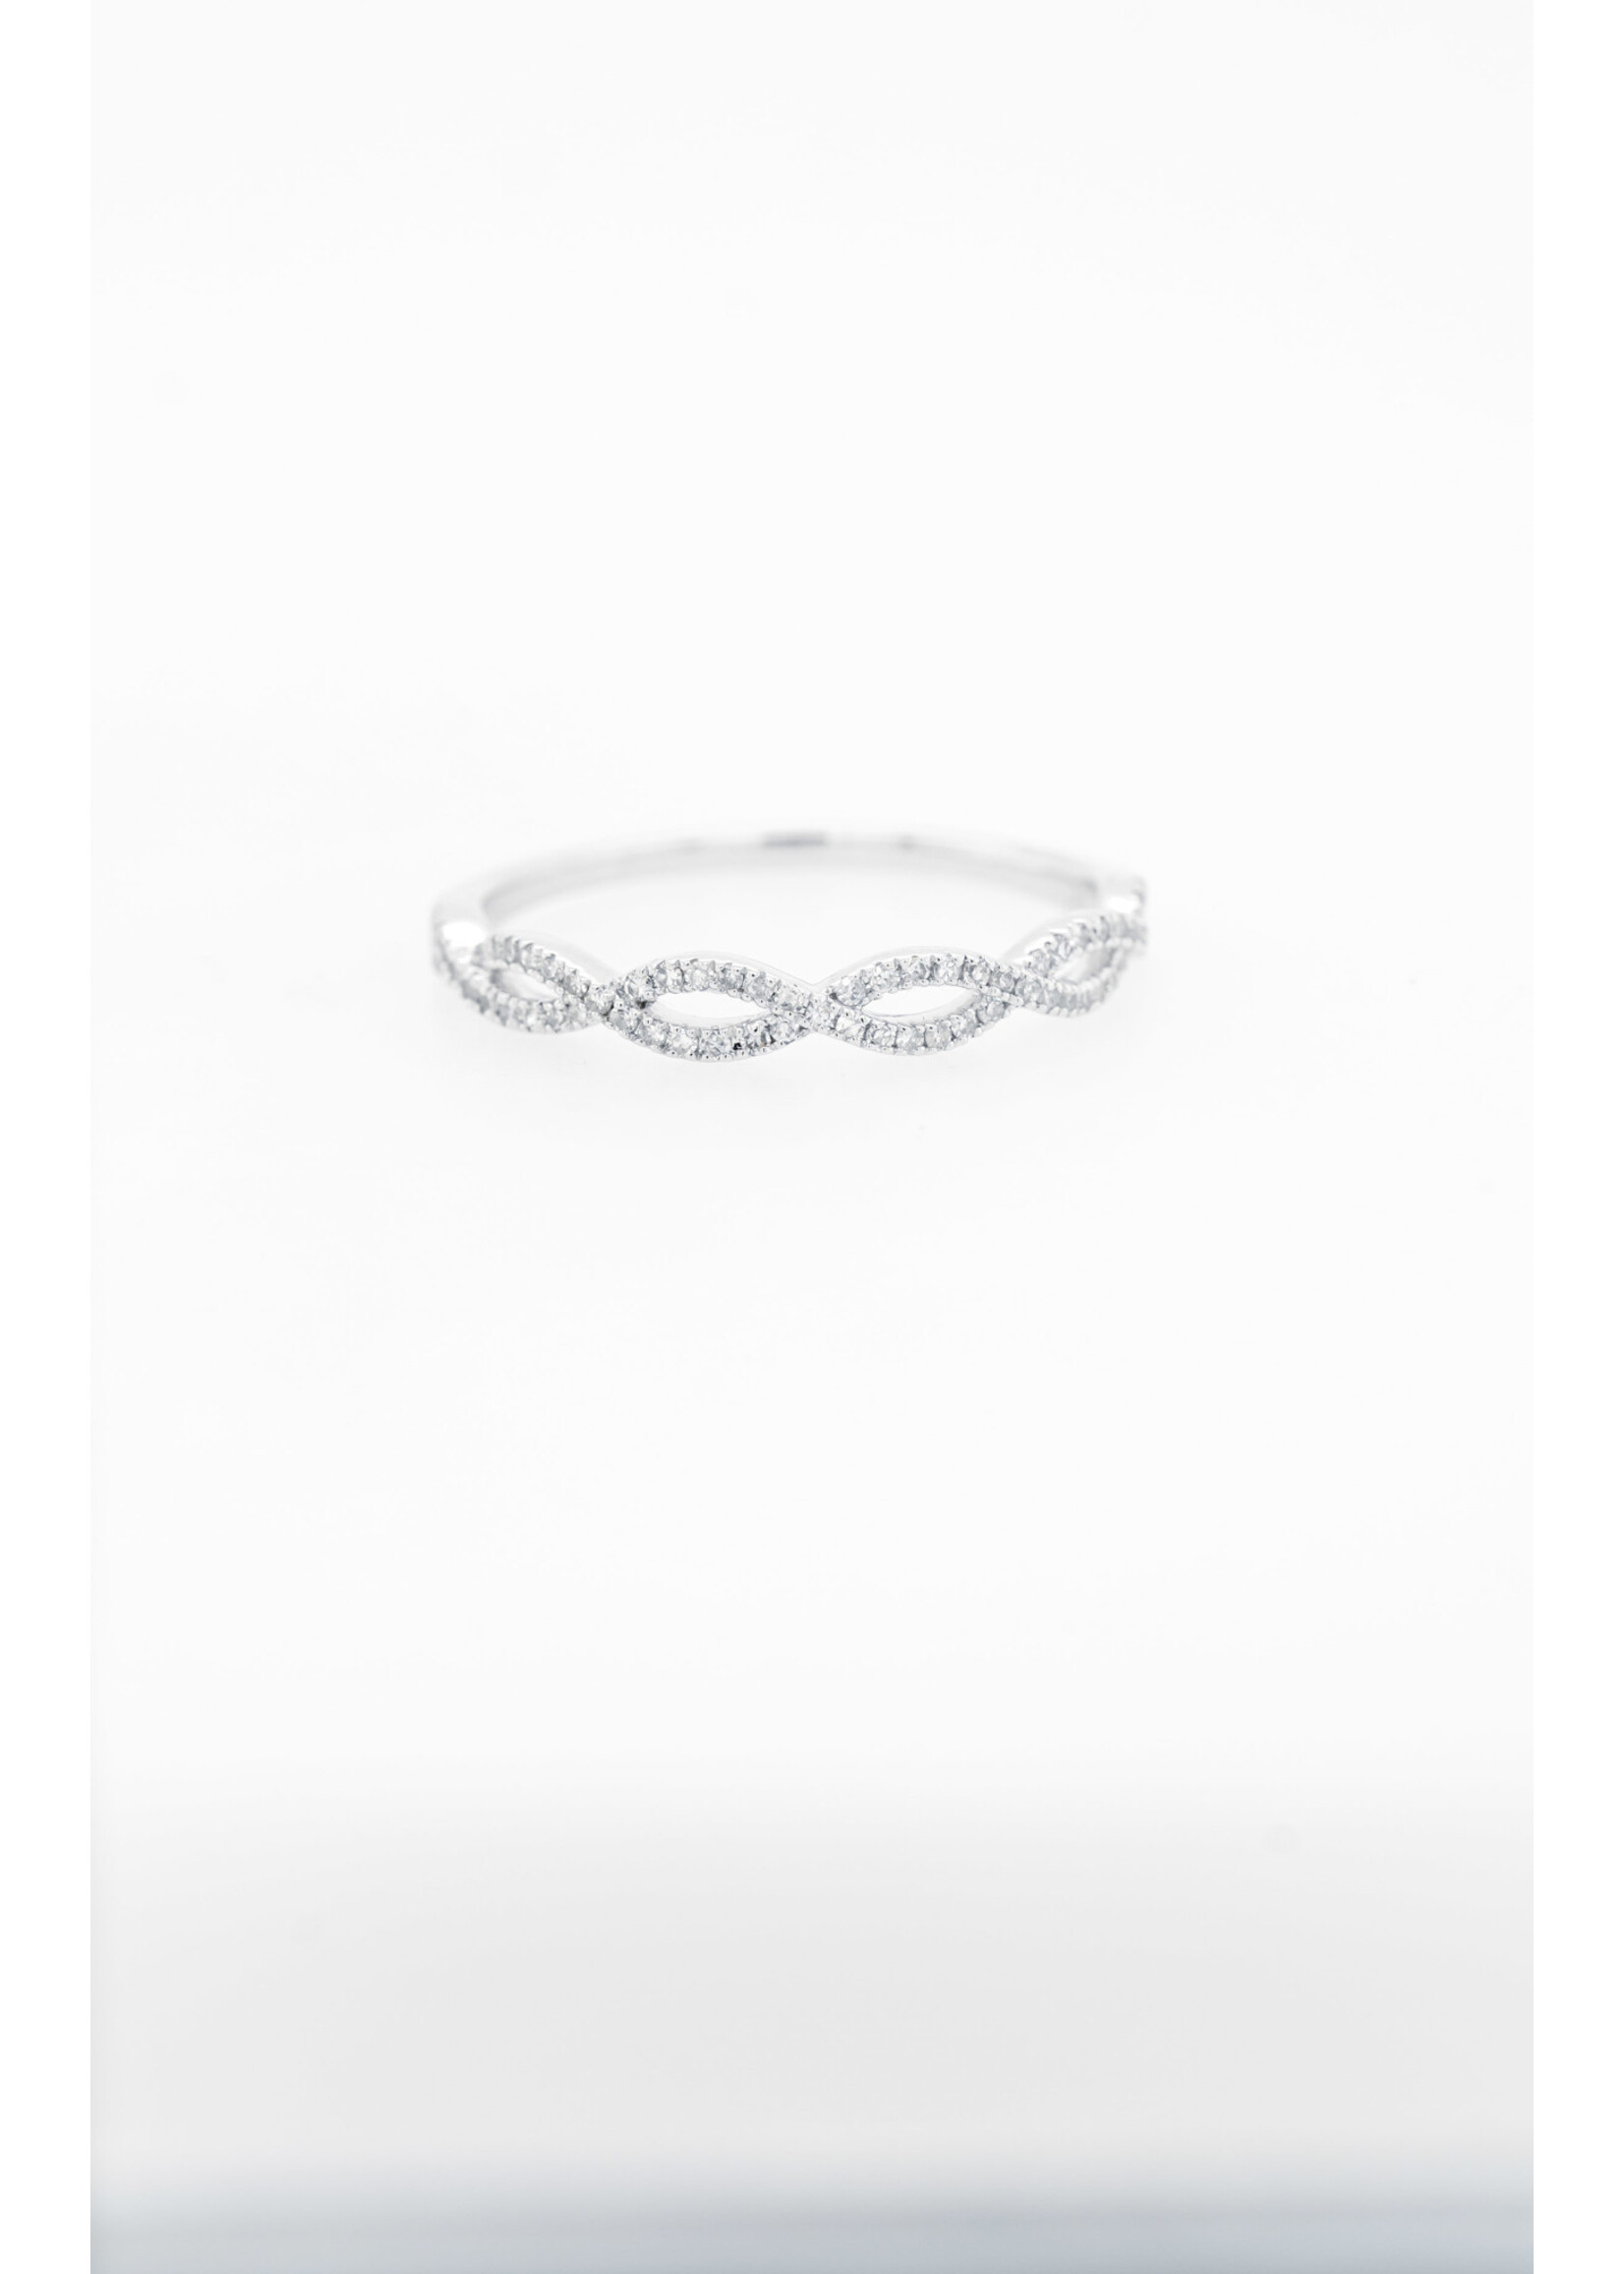 14KW 1.5g .24ctw Diamond Infinity Stackable Band (size 7)